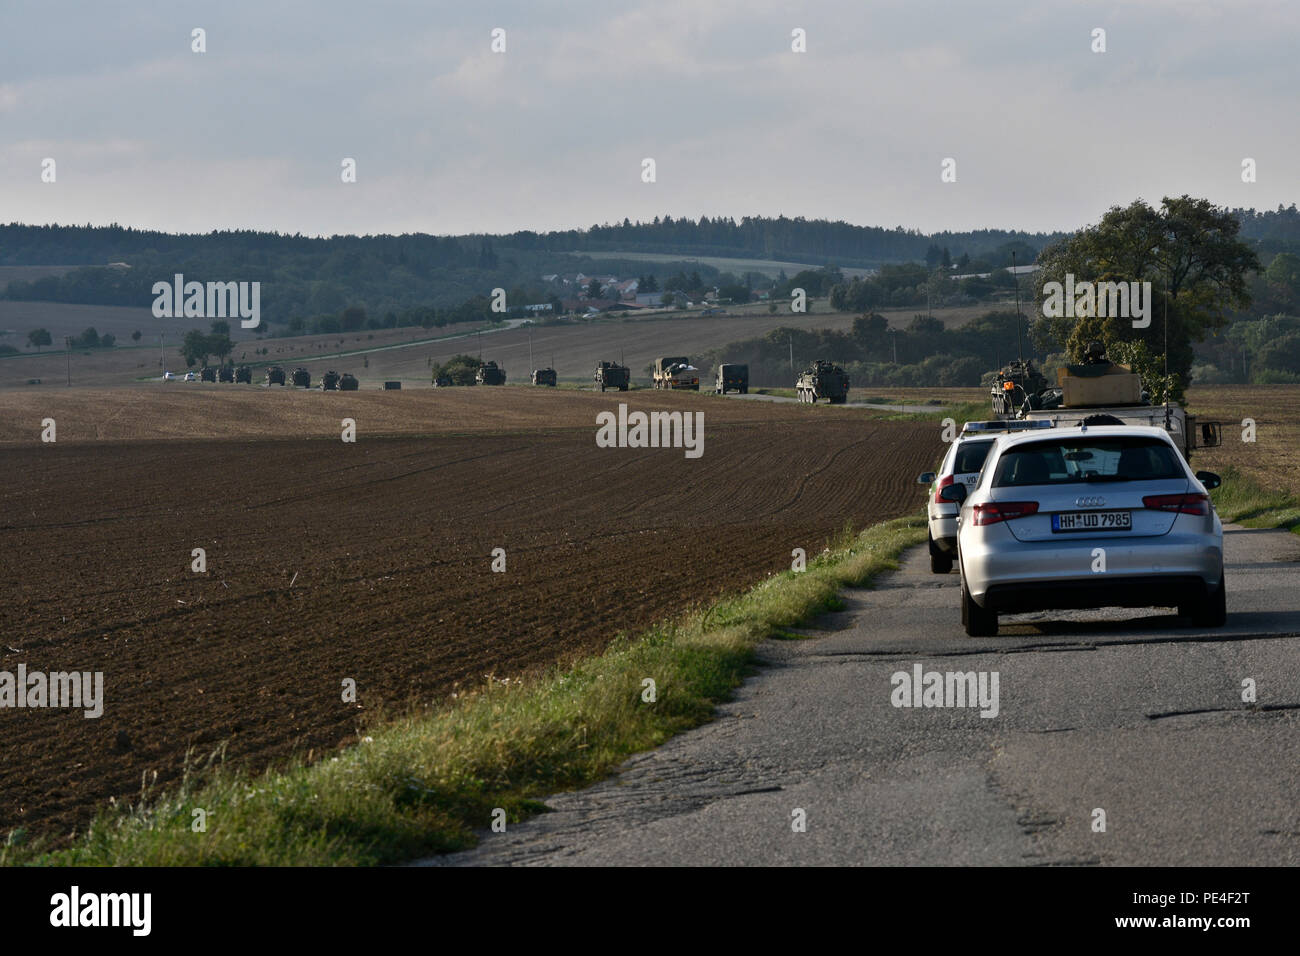 Troopers assigned to 4th Squadron, 2nd Cavalry Regiment, conduct a vehicle convoy through local Czech Republic farmland during Dragoon Crossing, a tactical road march starting out at Rose Barracks, Germany and continuing through the Czech Republic and the Slovak Republic ending in Hungary Sept. 13, 2015. The purpose of the exercise is to reassure NATO allies of the U.S. intent during Operation Atlantic Resolve while demonstrating interoperability and freedom of movement throughout Eastern Europe. (U.S. Army photo by Sgt. William A. Tanner/released) Stock Photo